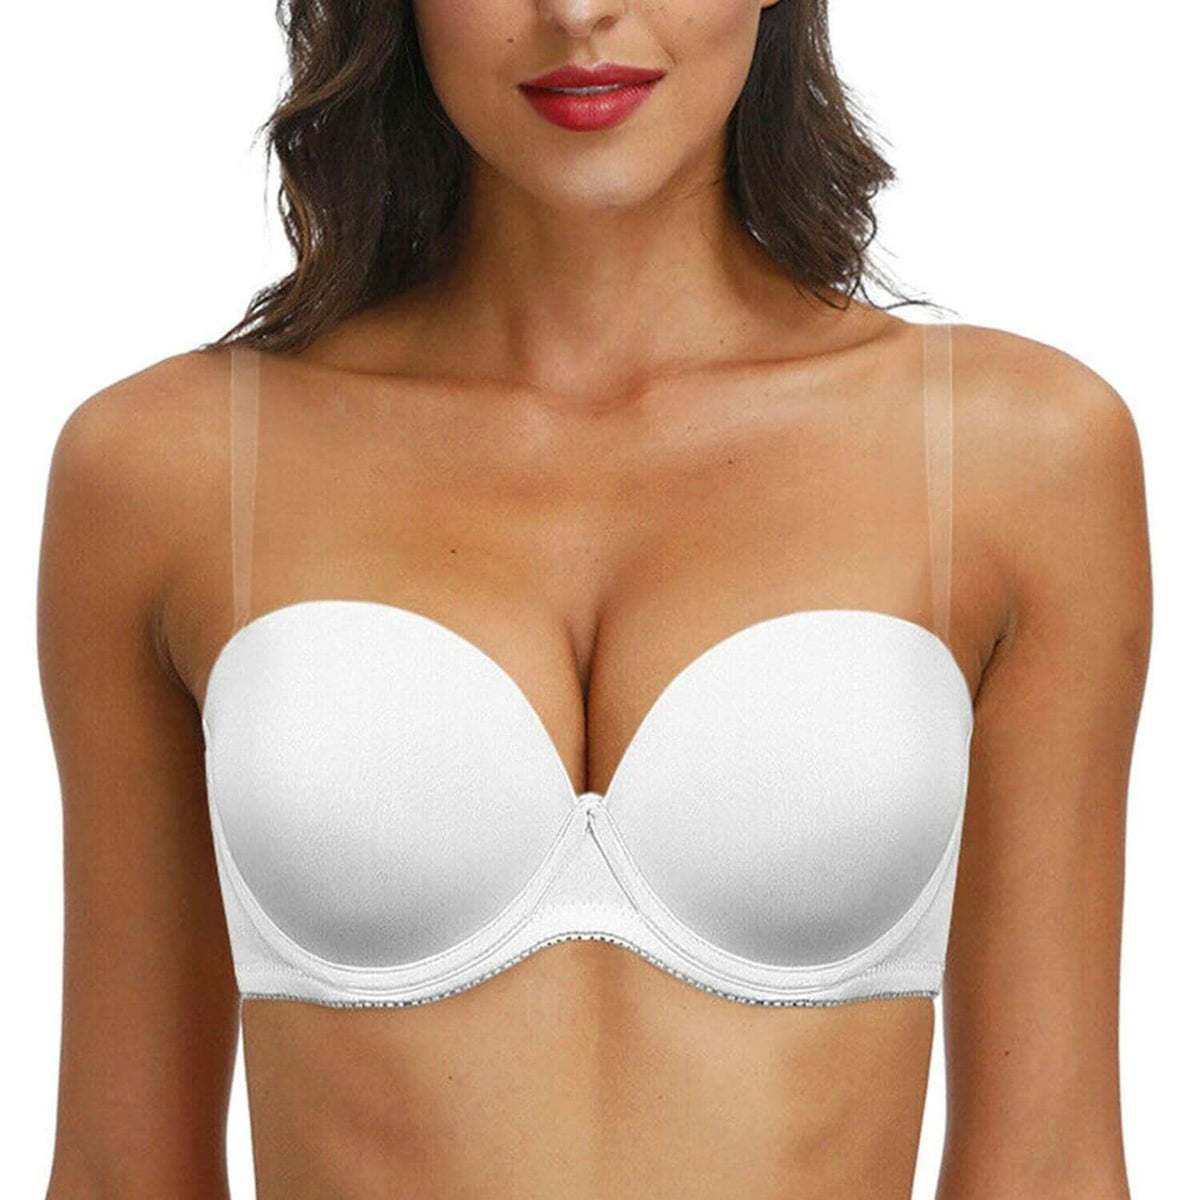 Strapless bras - clear strap push-up padded bras: Natural style1874-1893